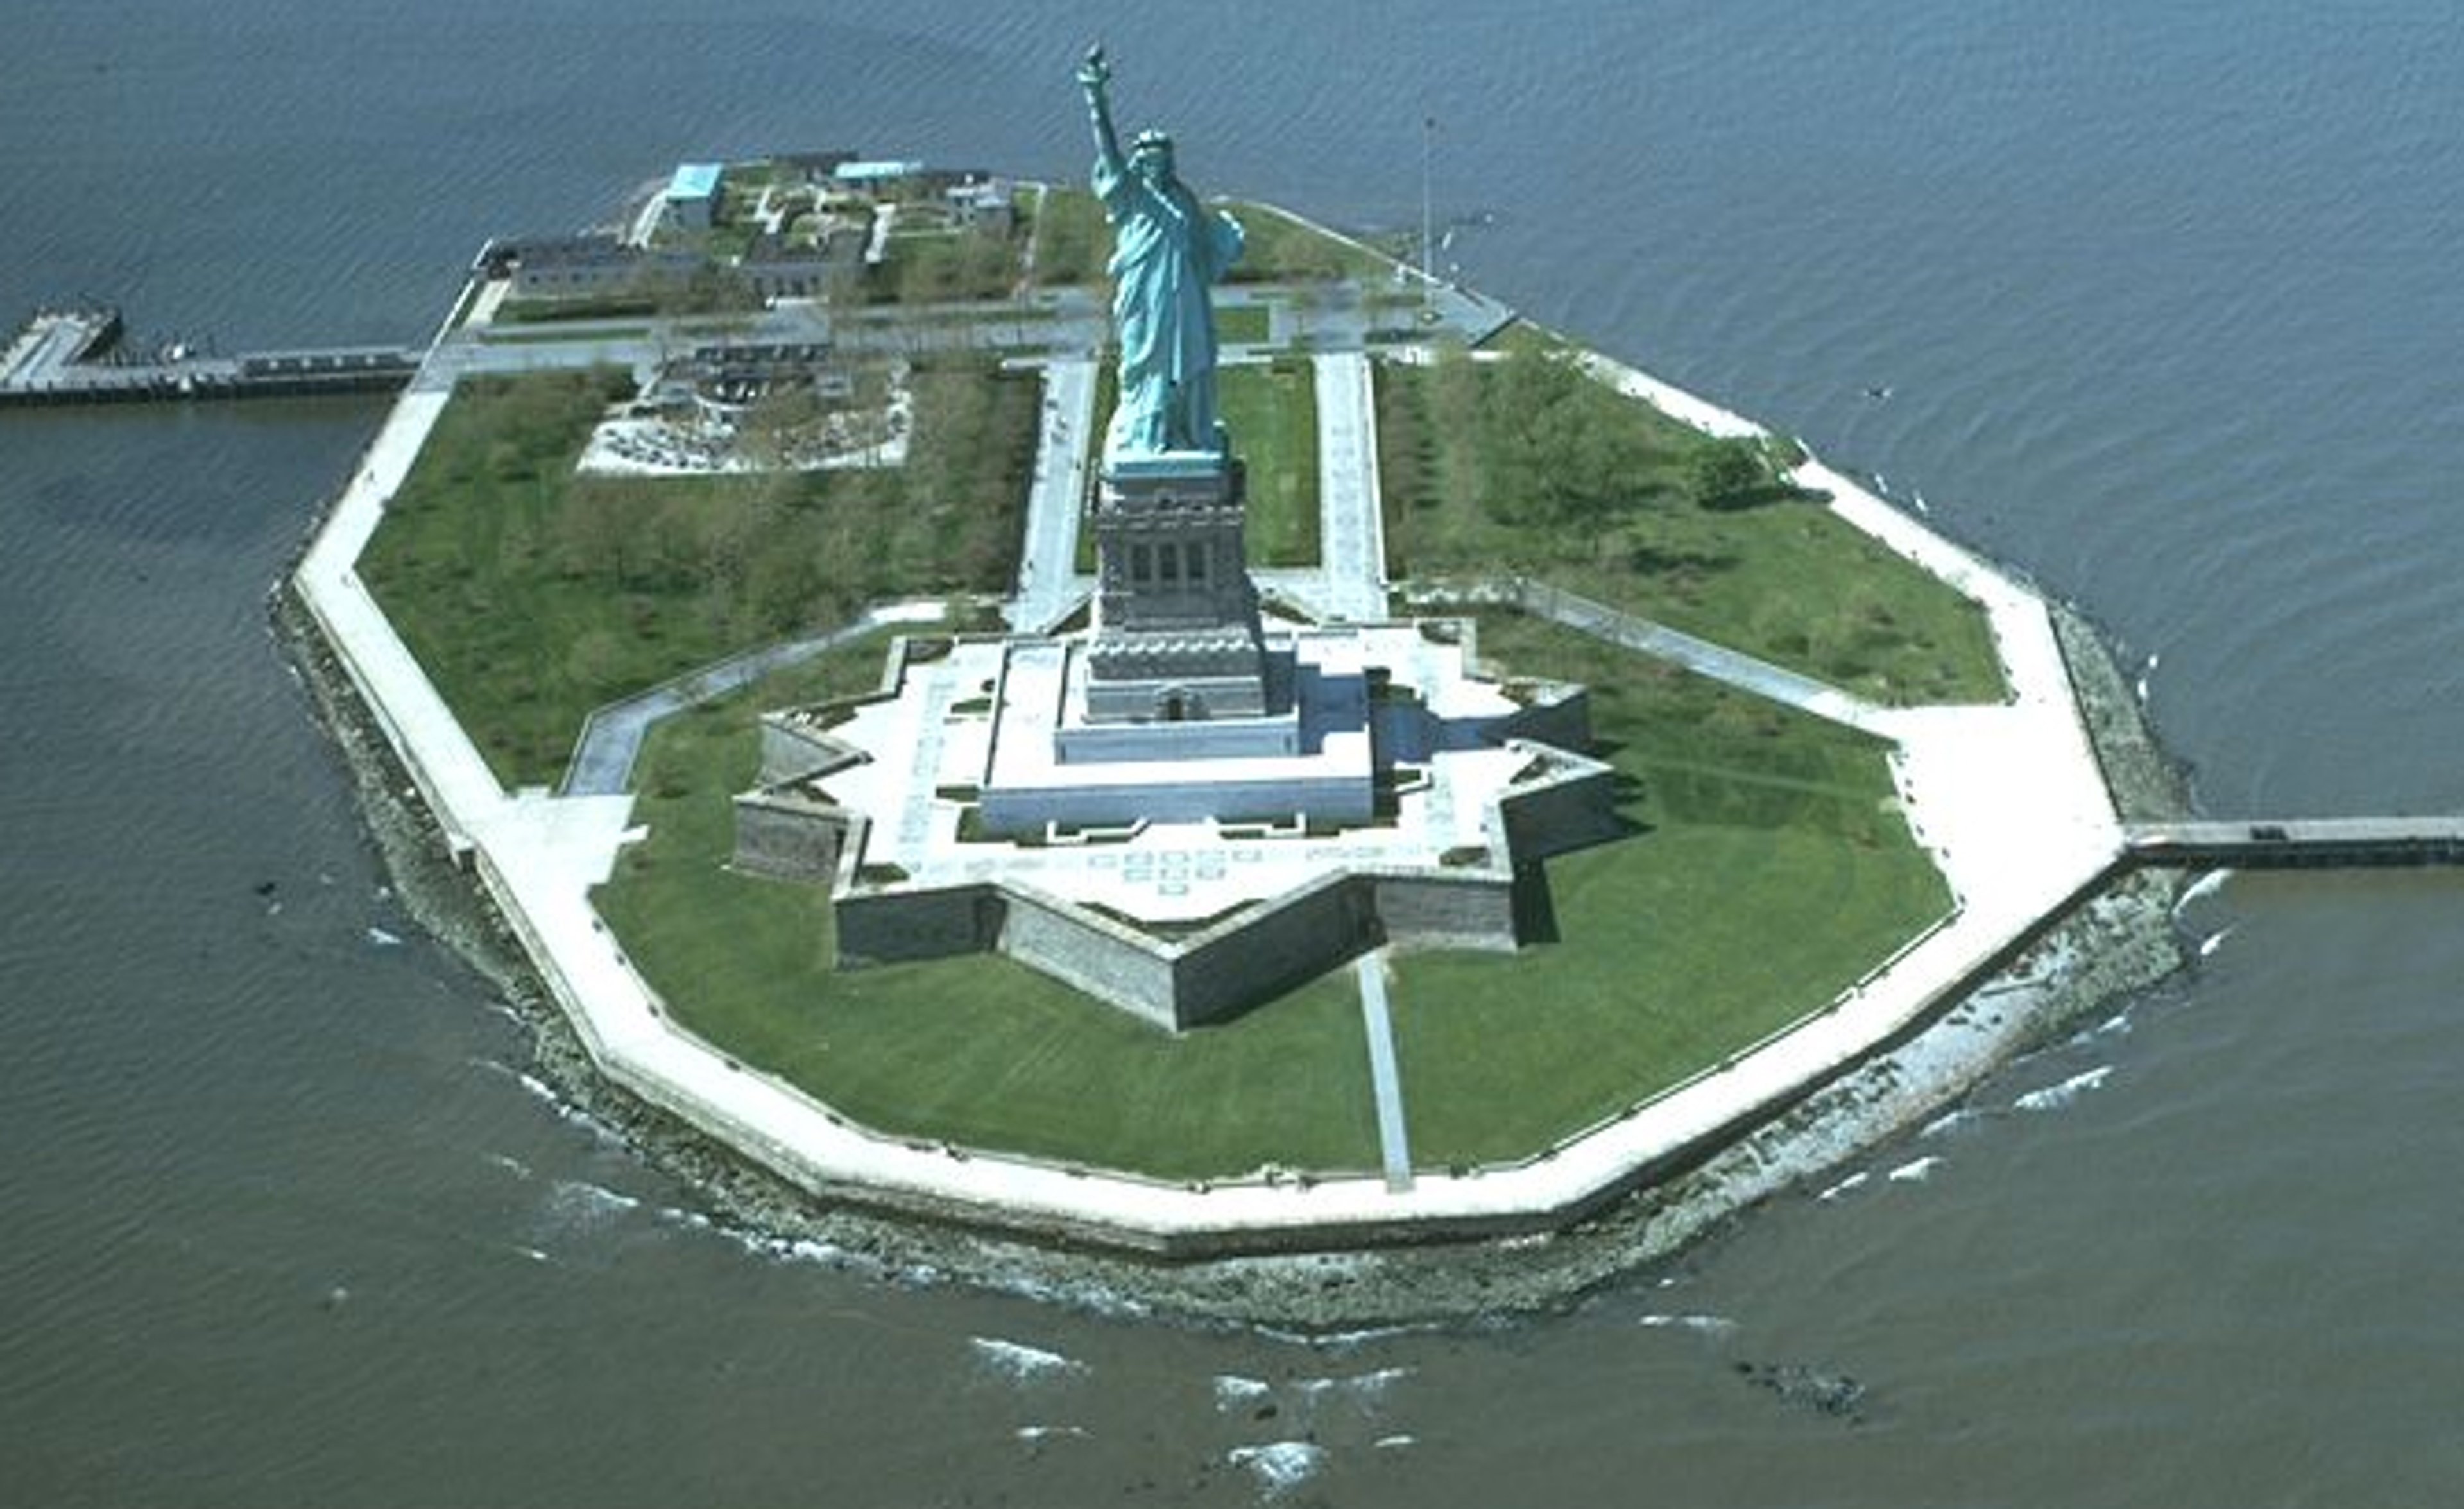 Where Is The Statue Of Liberty Located (Liberty Island in New York Harbor)